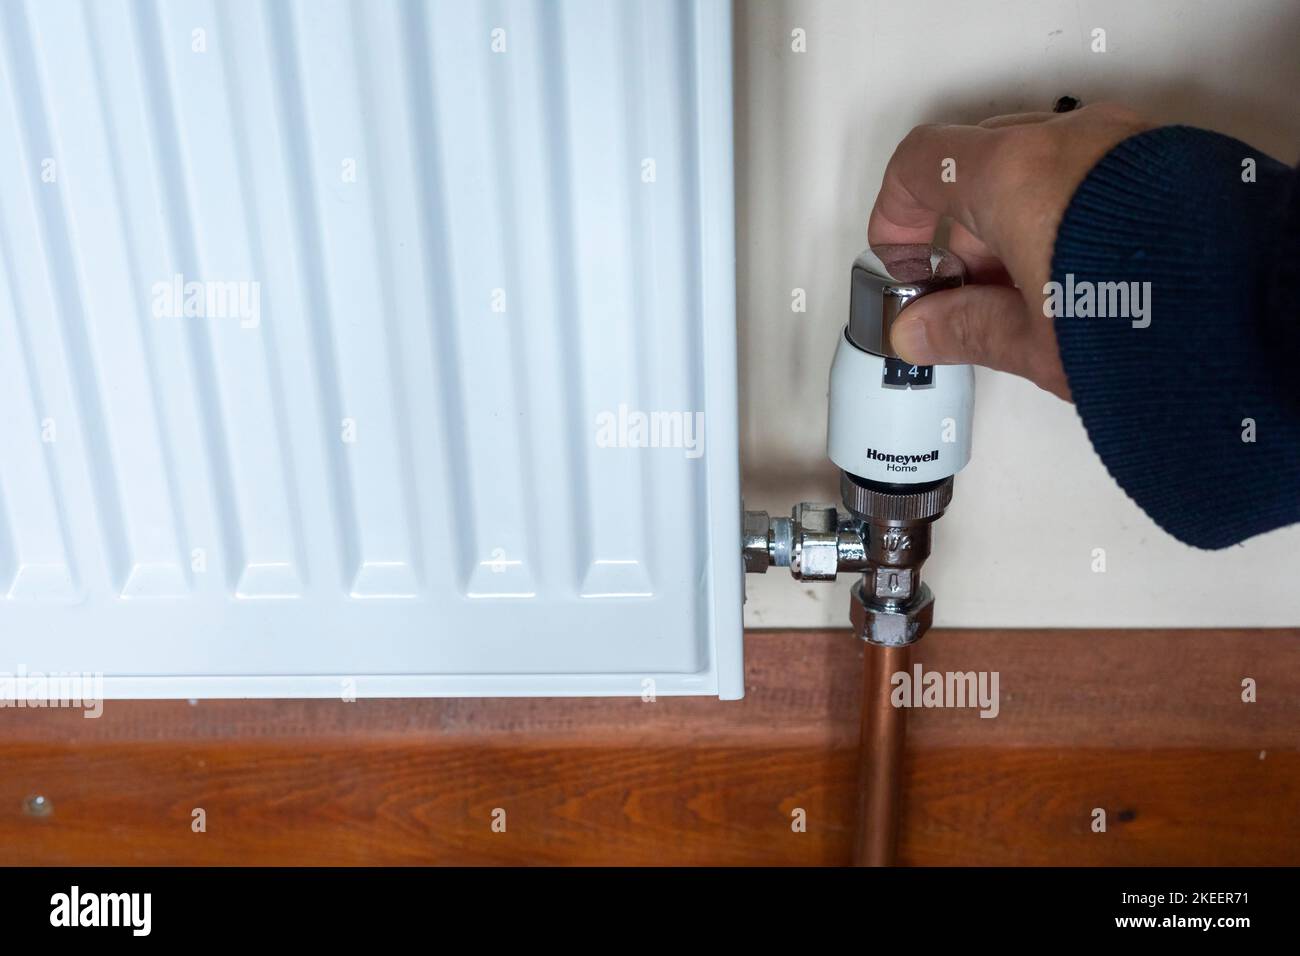 Turning down a thermostatic radiator valve (TRV) on the central heating to reduce the temperature and conserve energy Stock Photo